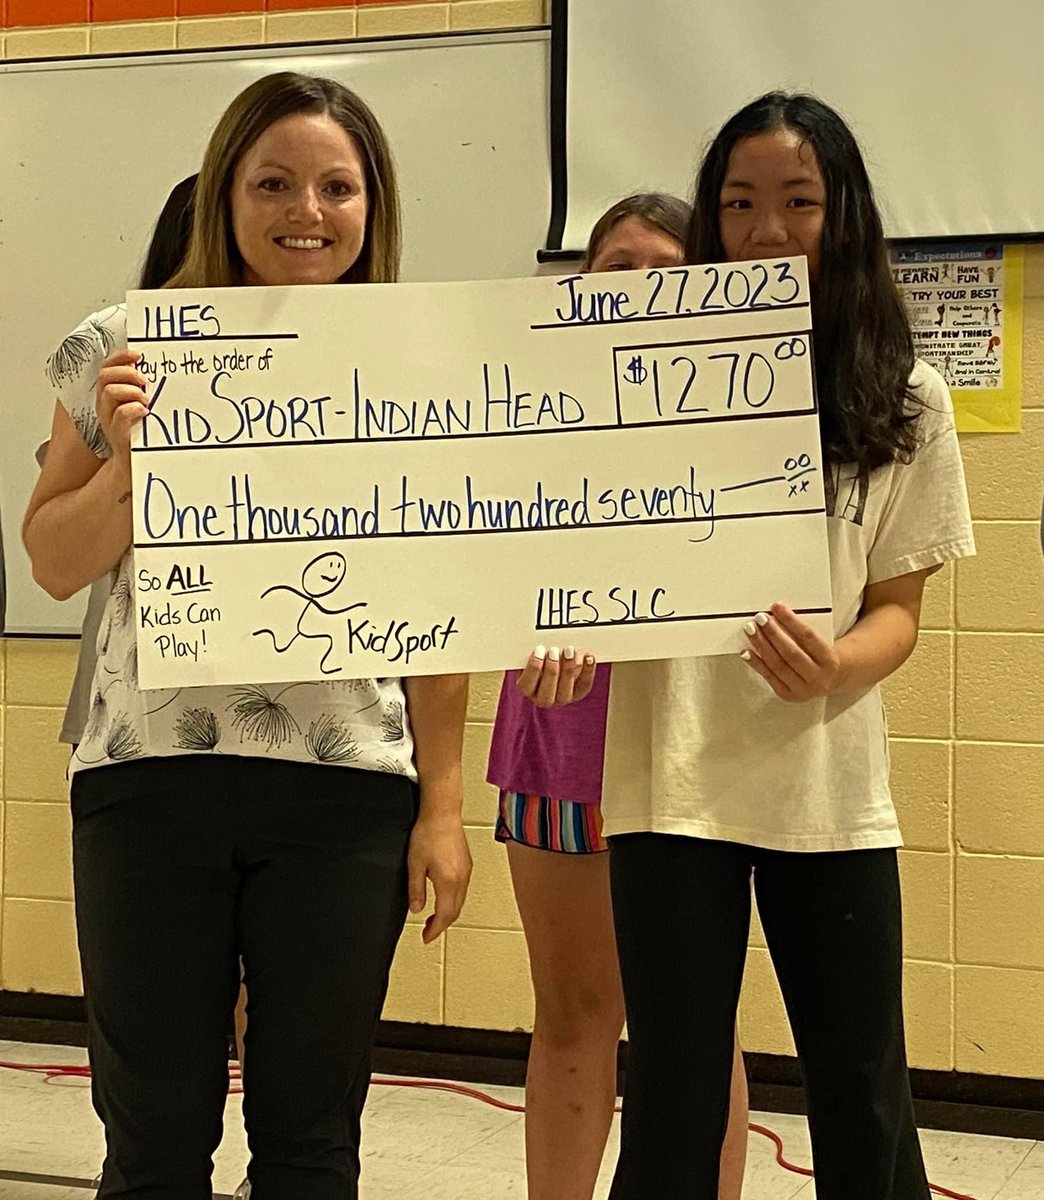 During our year end assembly, the SLC was honoured to present Indian Head @KidSportSK with a cheque for $1270 from their fundraising efforts! THANK YOU students, staff, and families who helped raise this money through our Movie Night, Menchies Day and Freezie Fridays.